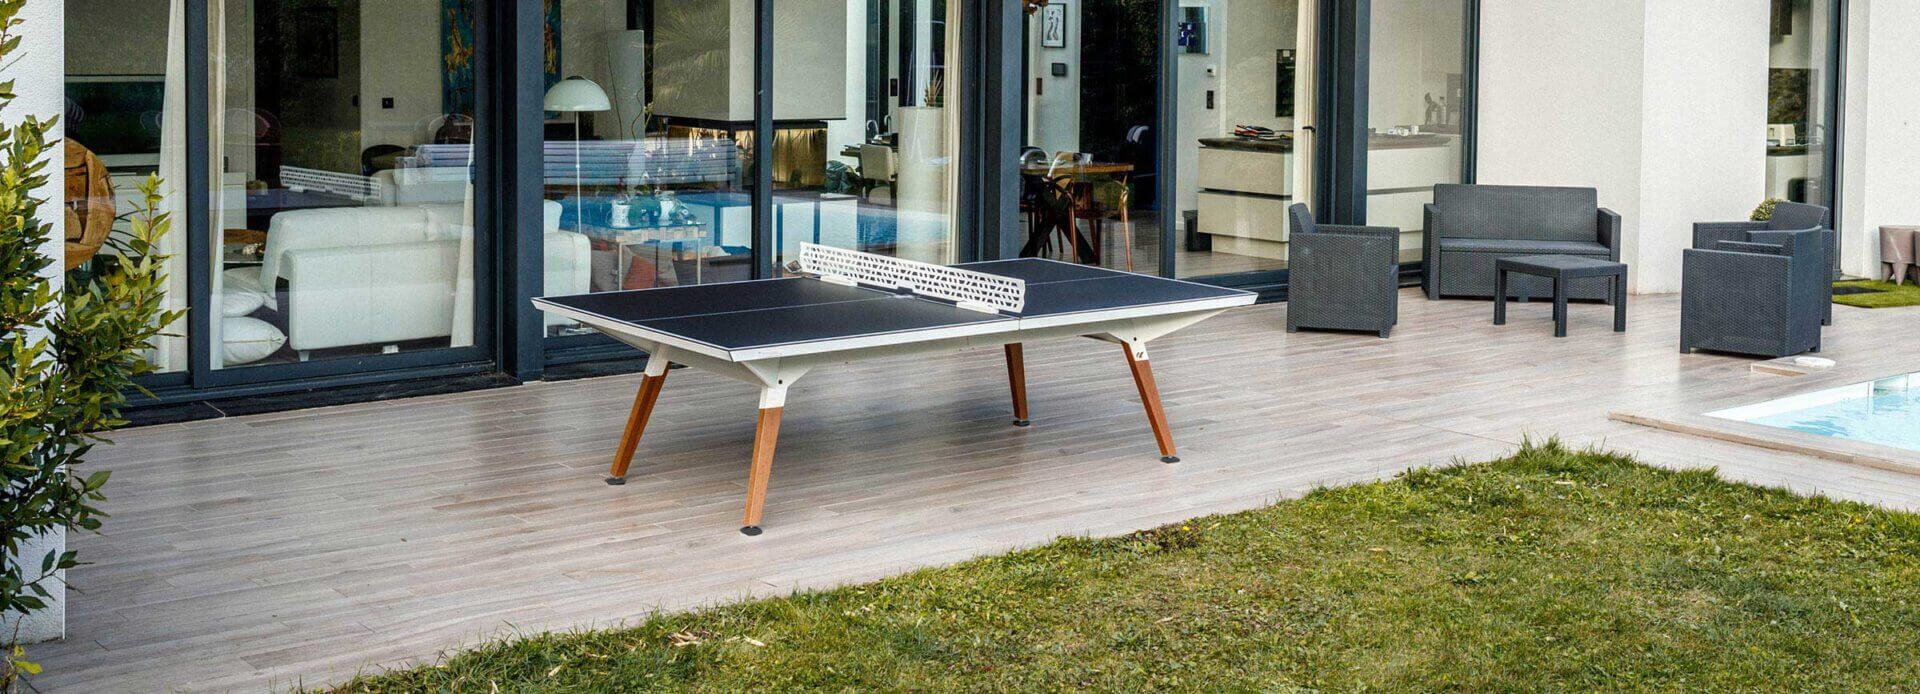 Cornilleau Lifestyle Outdoor Ping Pong Table